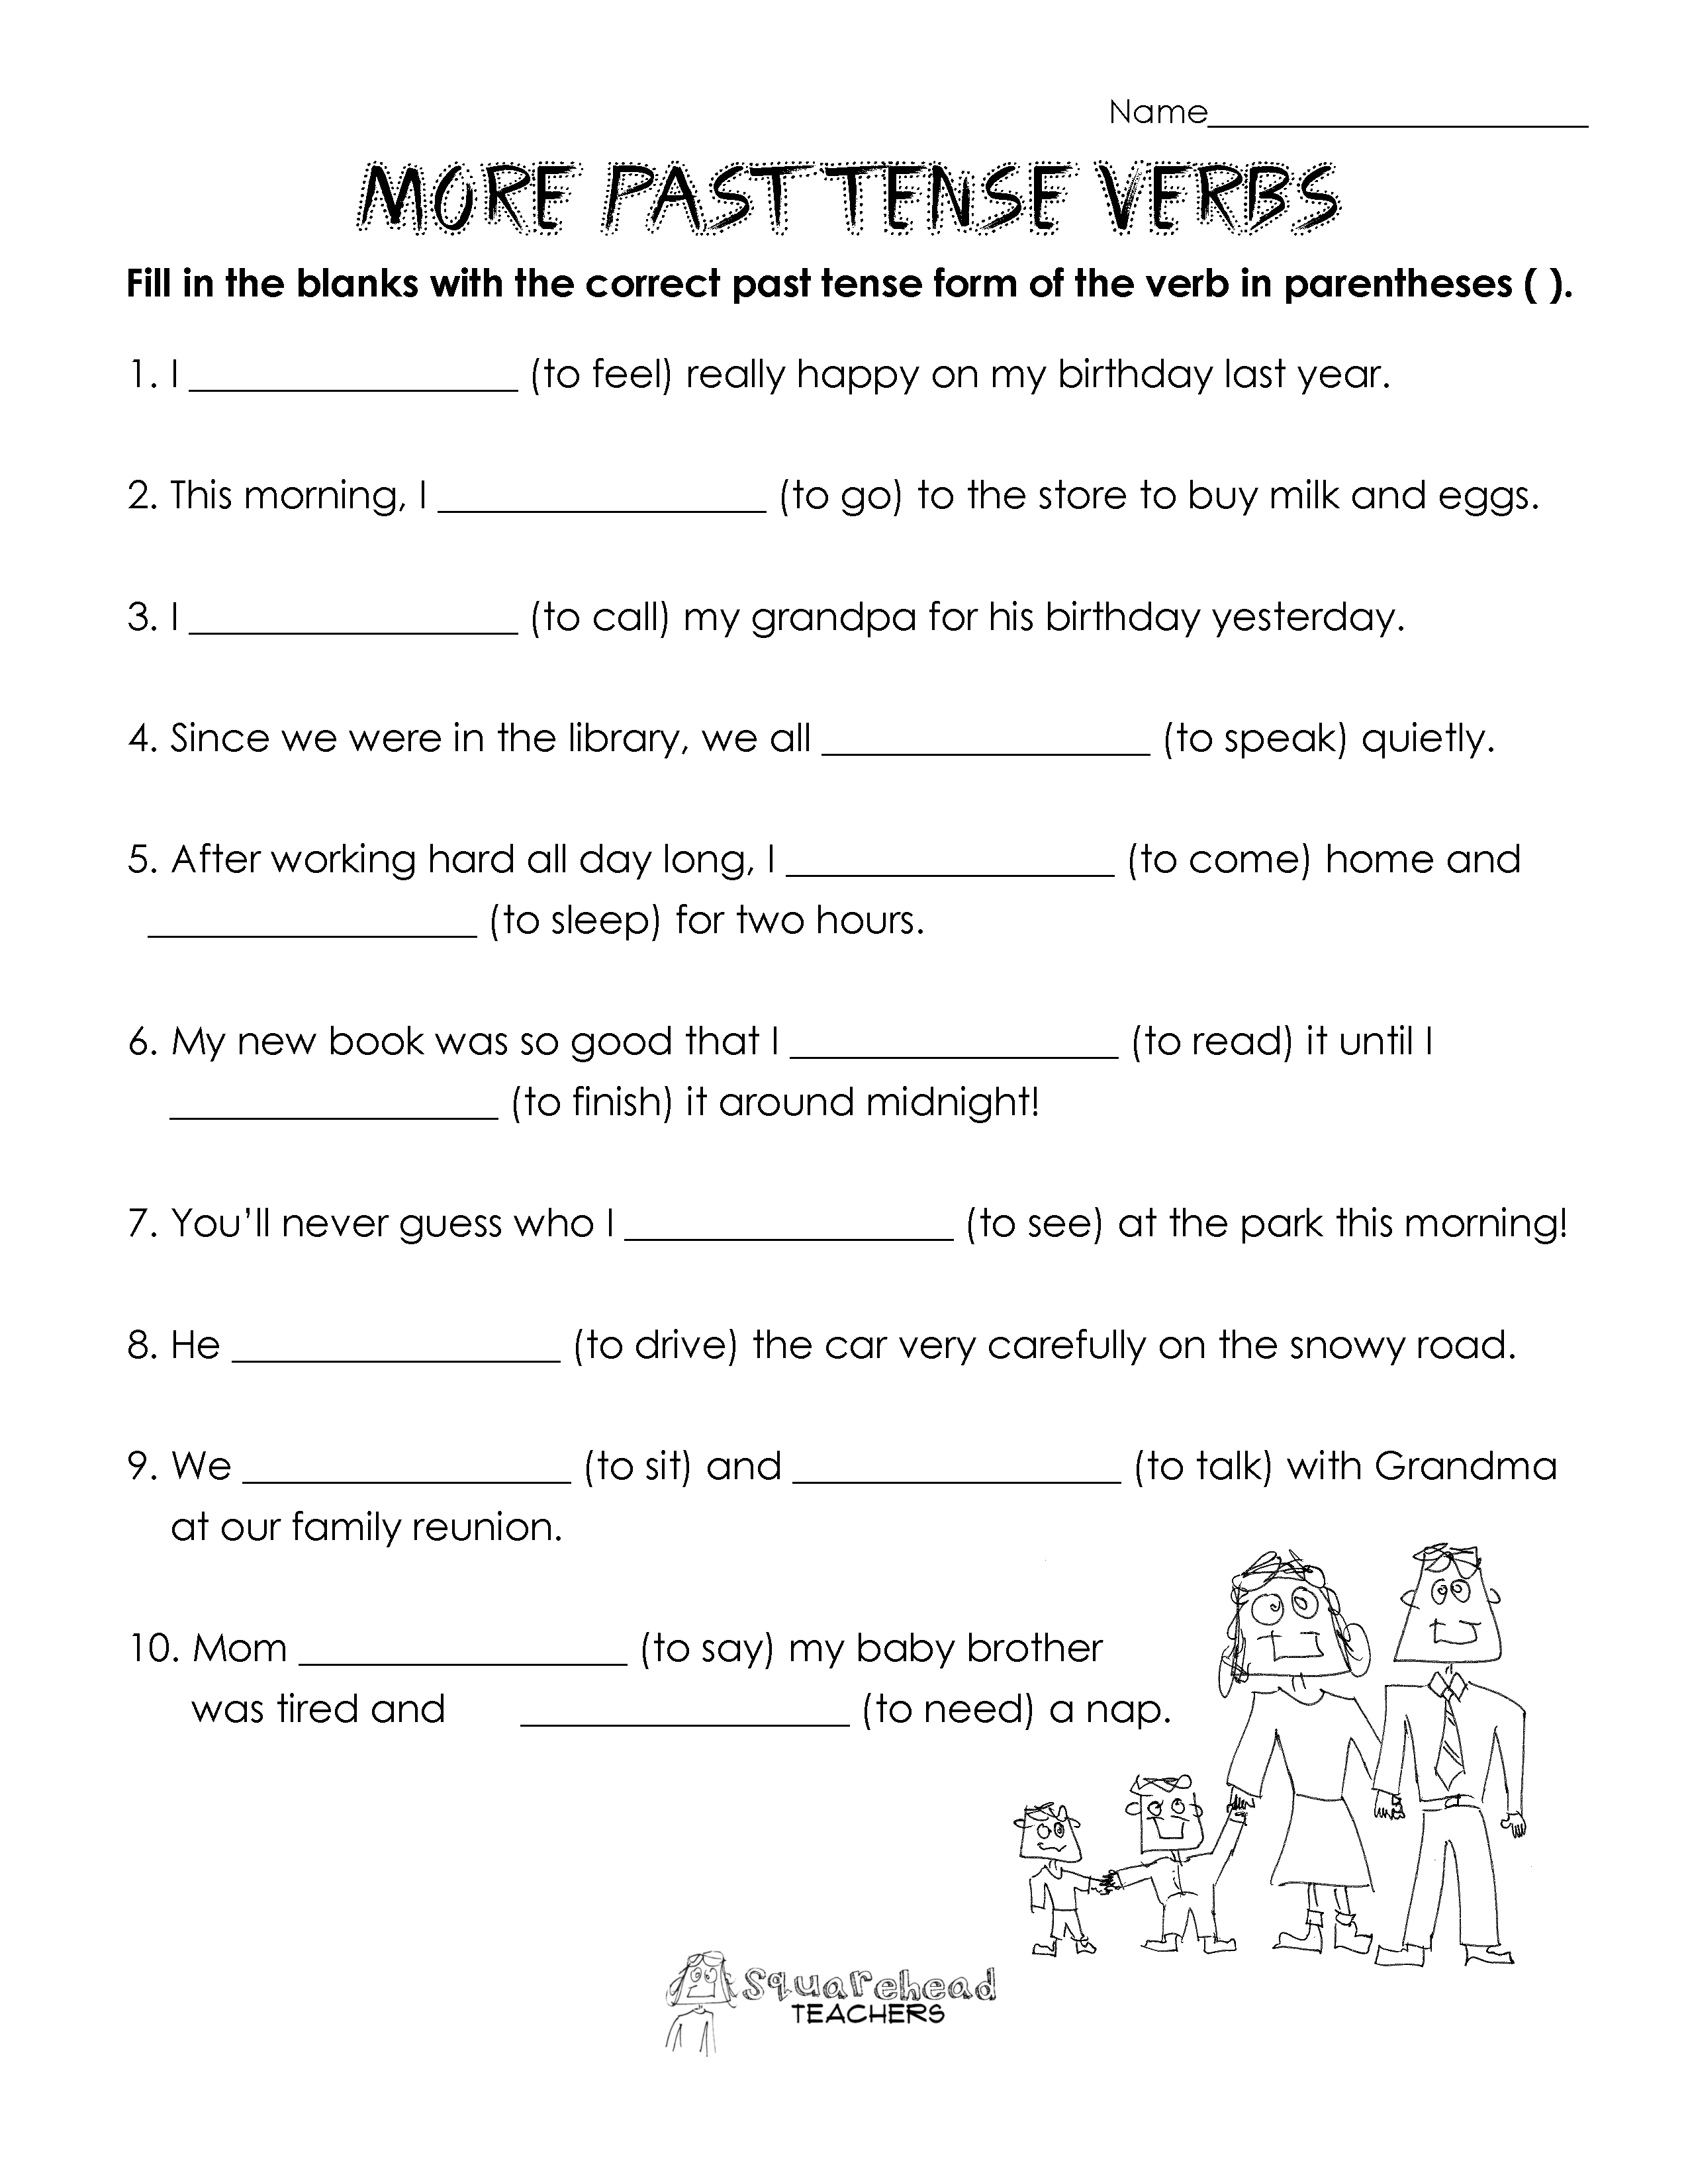 19 Best Images Of Past Tense Verbs Worksheets 2nd Grade Cutting Past Tense Verbs Worksheets